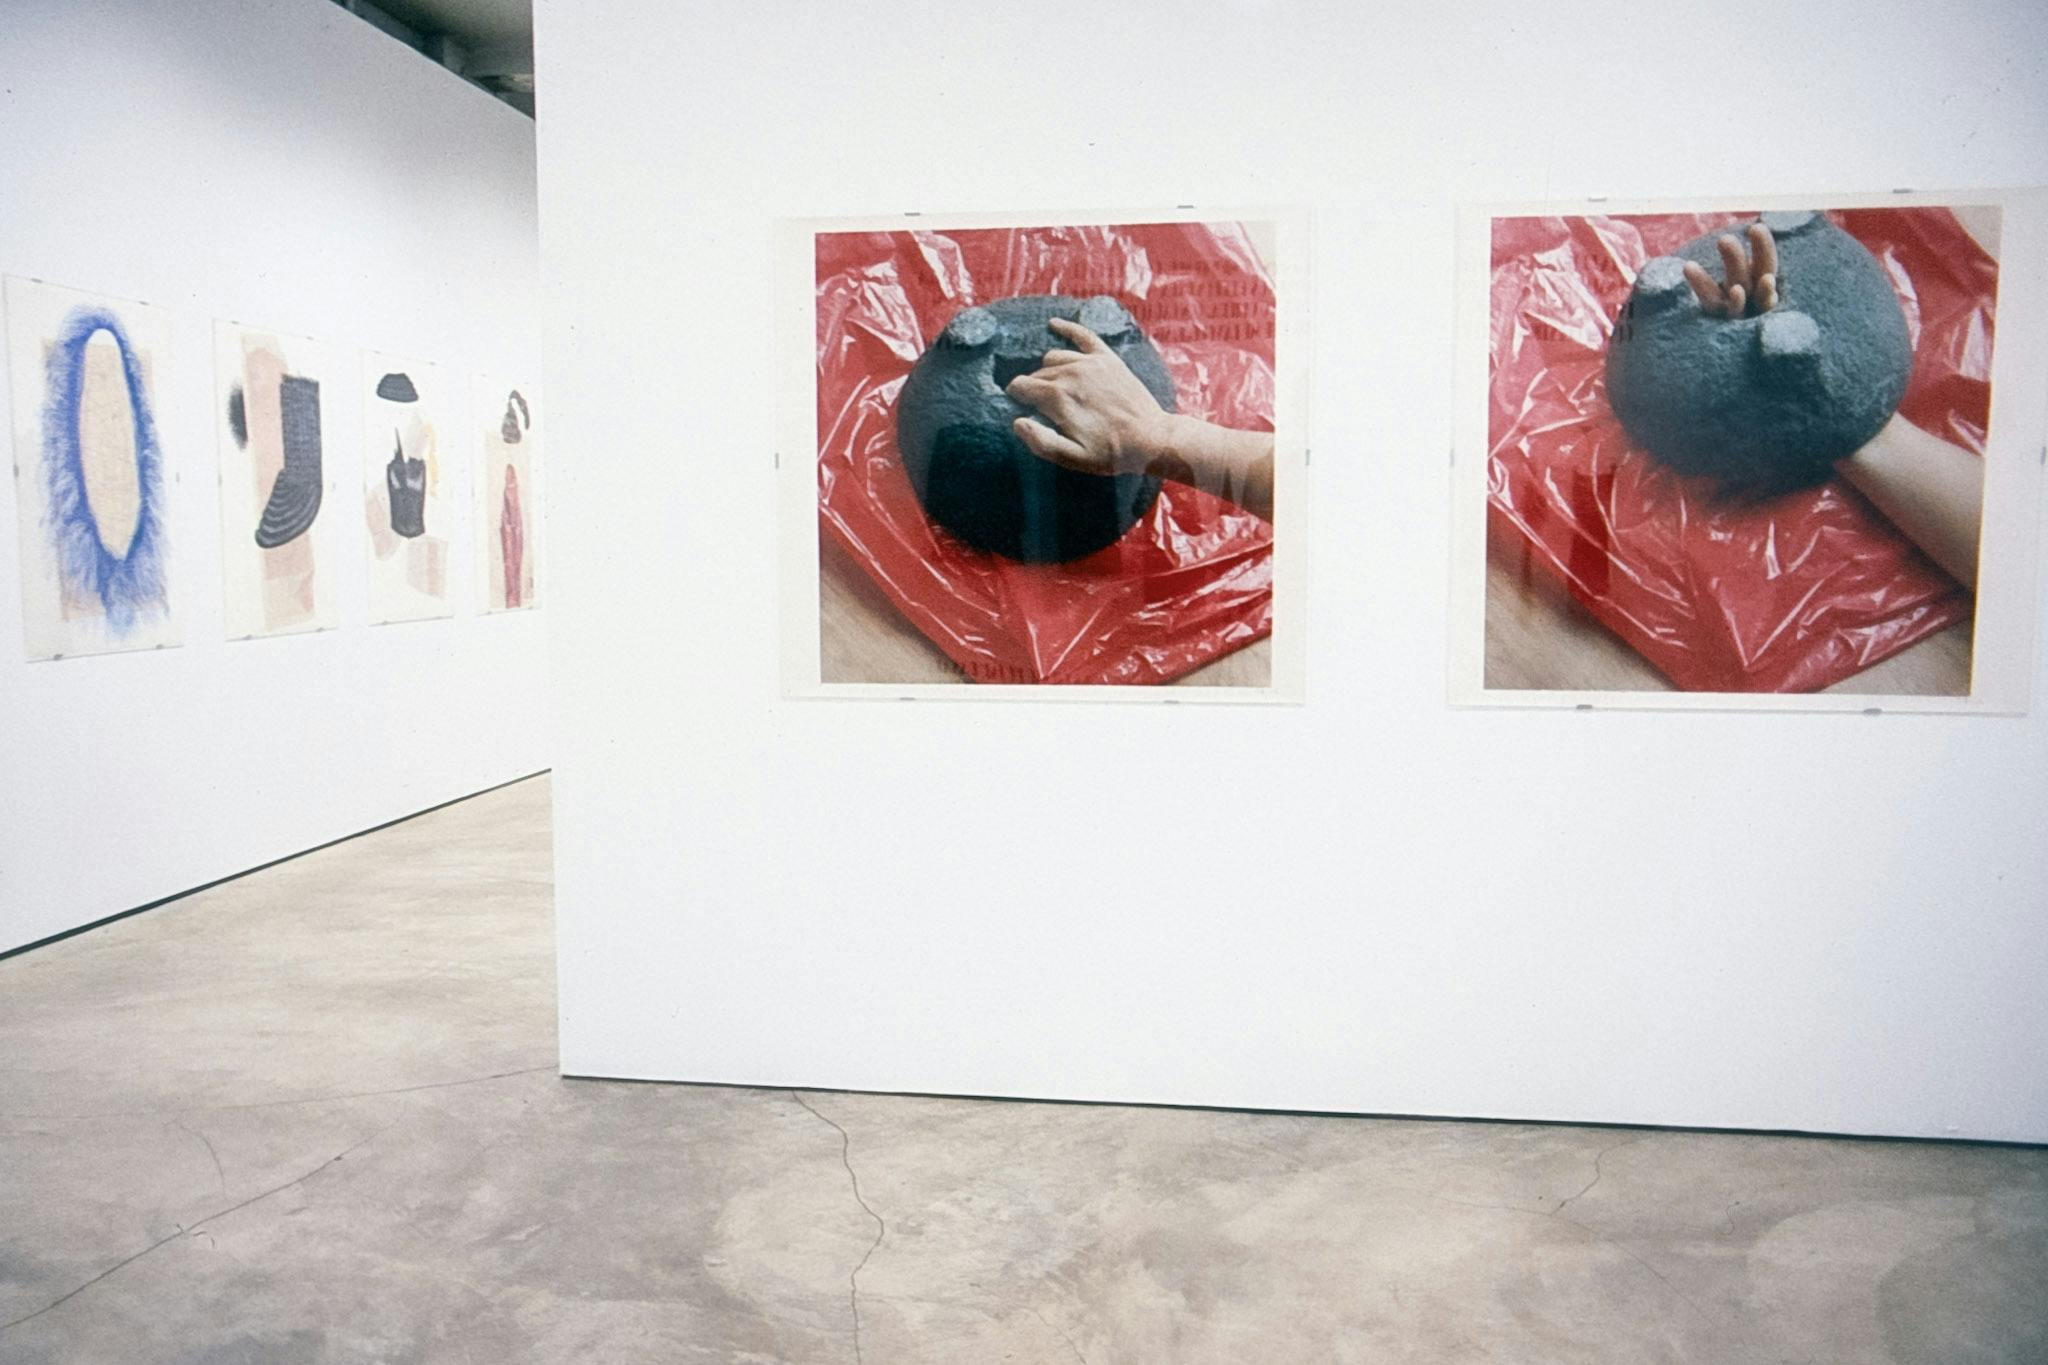 A gallery installation view of various paintings and photographs. On the front wall, there are two photographs of a human’s arm handing a black donut-shaped stone on a red plastic bag.